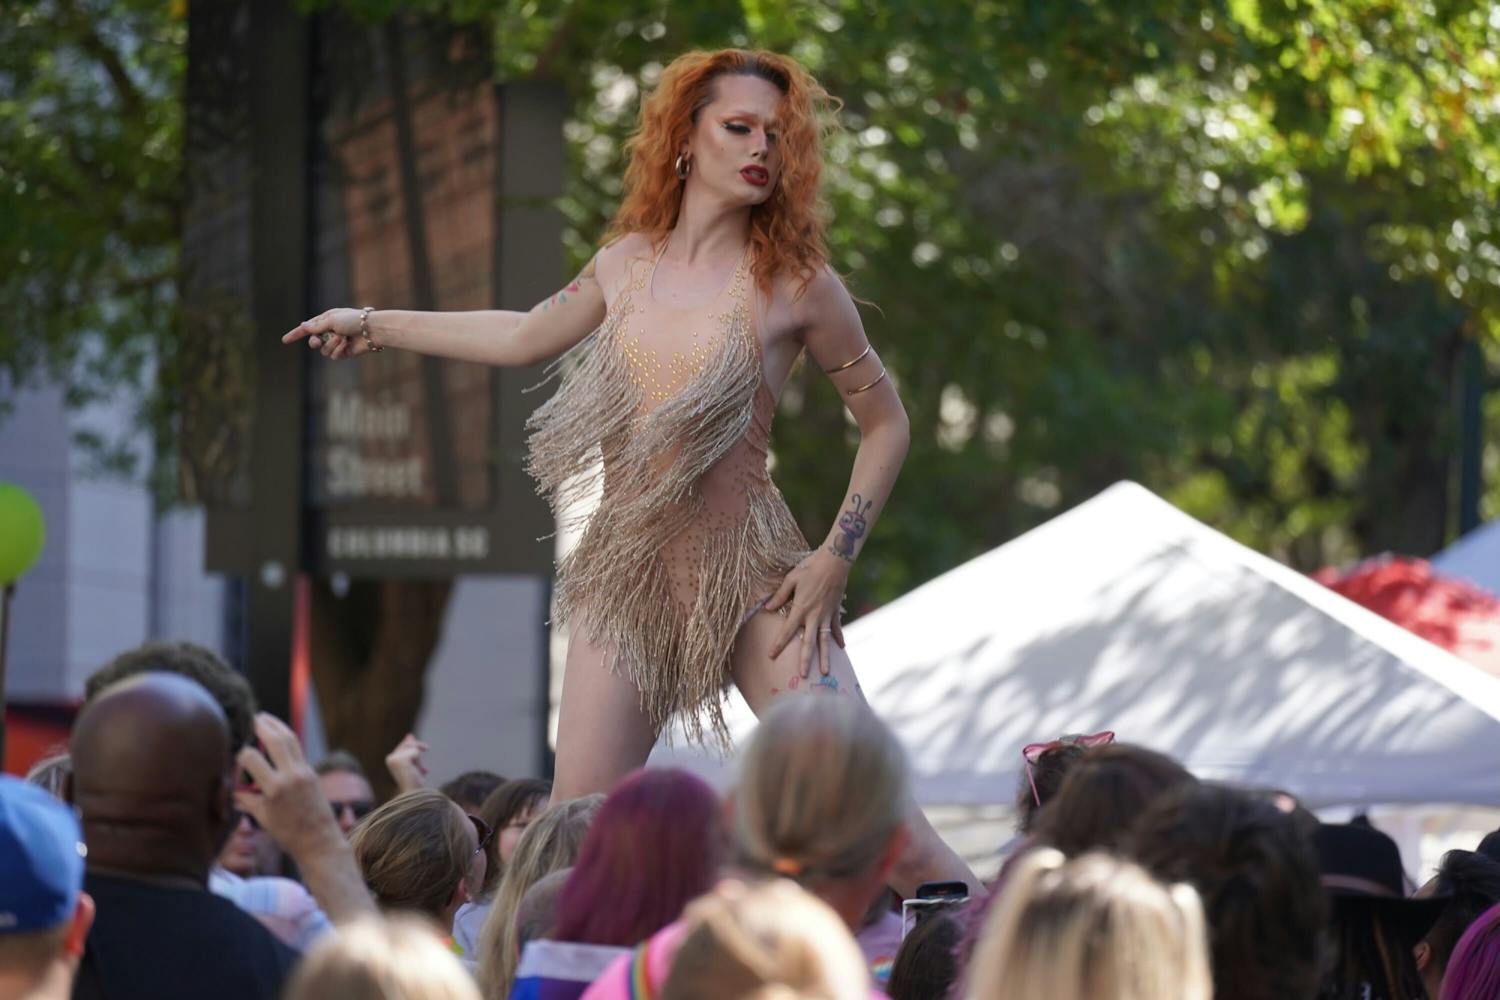 Koko Dove performs on stage during the Famously Hot South Carolina Pride Festival. Dove is a former Miss Outfest and serves as the social media/pageant coordinator for South Carolina Pride.